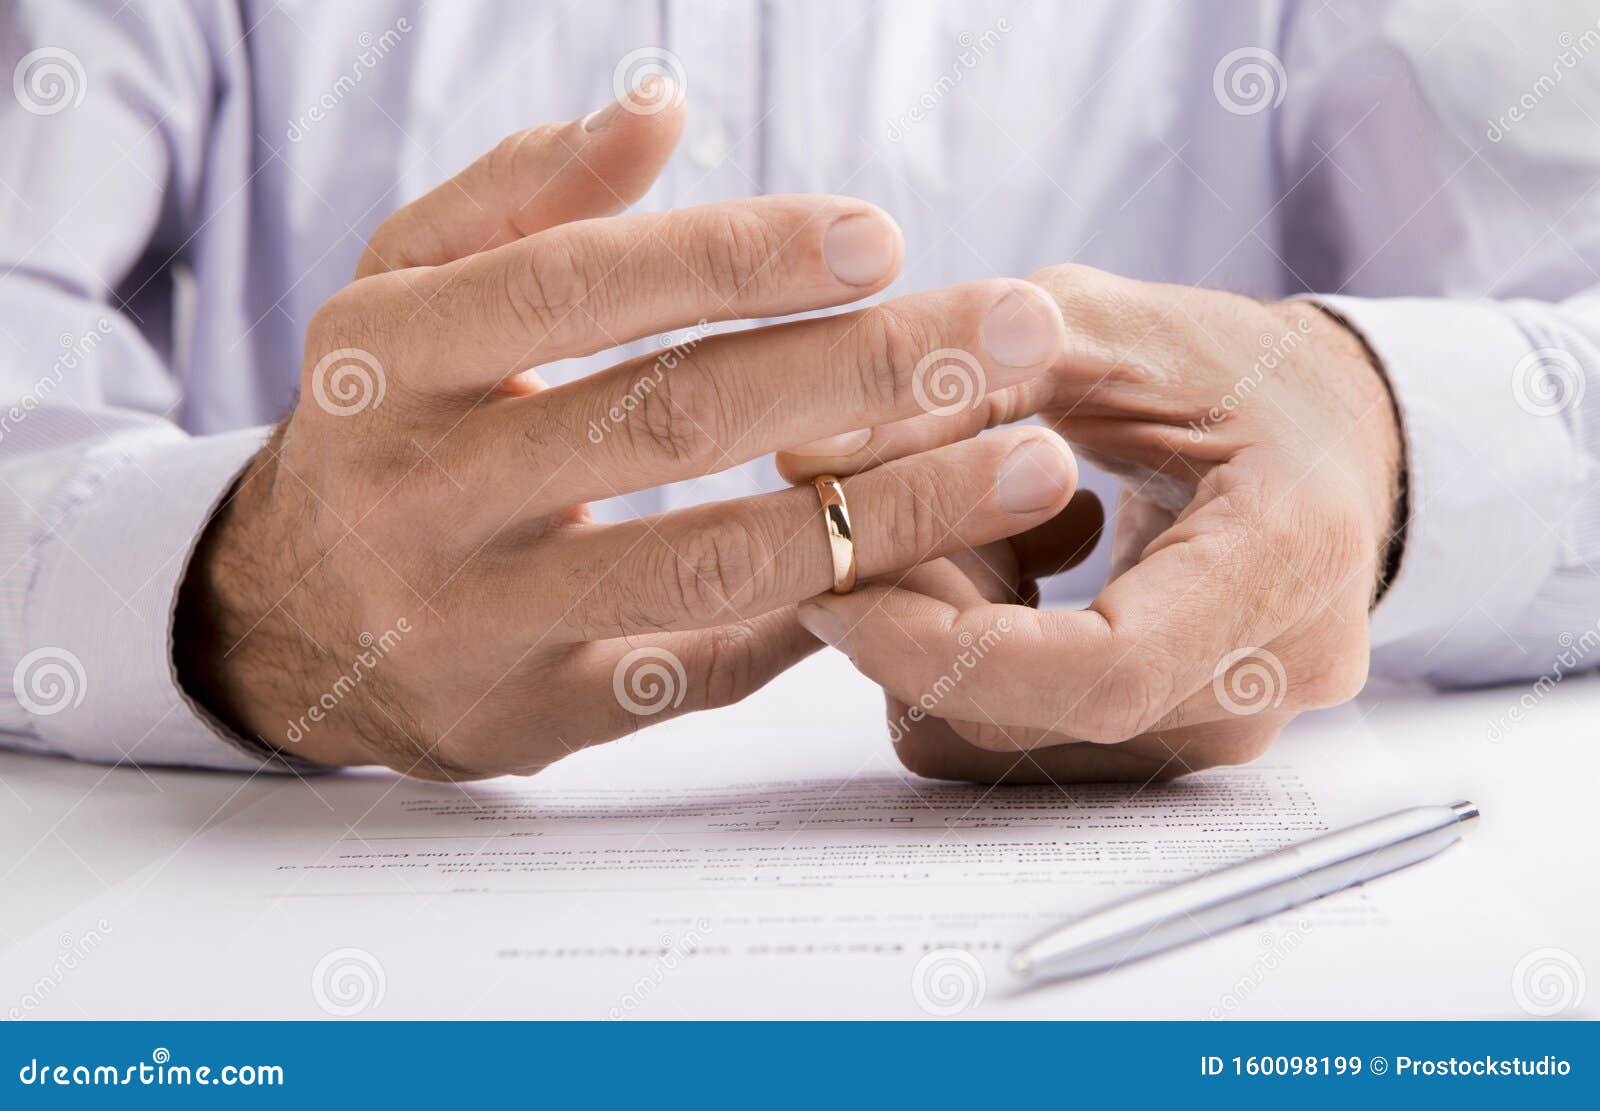 170+ Taking Off Wedding Ring Stock Photos, Pictures & Royalty-Free Images -  iStock | Man taking off wedding ring, Woman taking off wedding ring